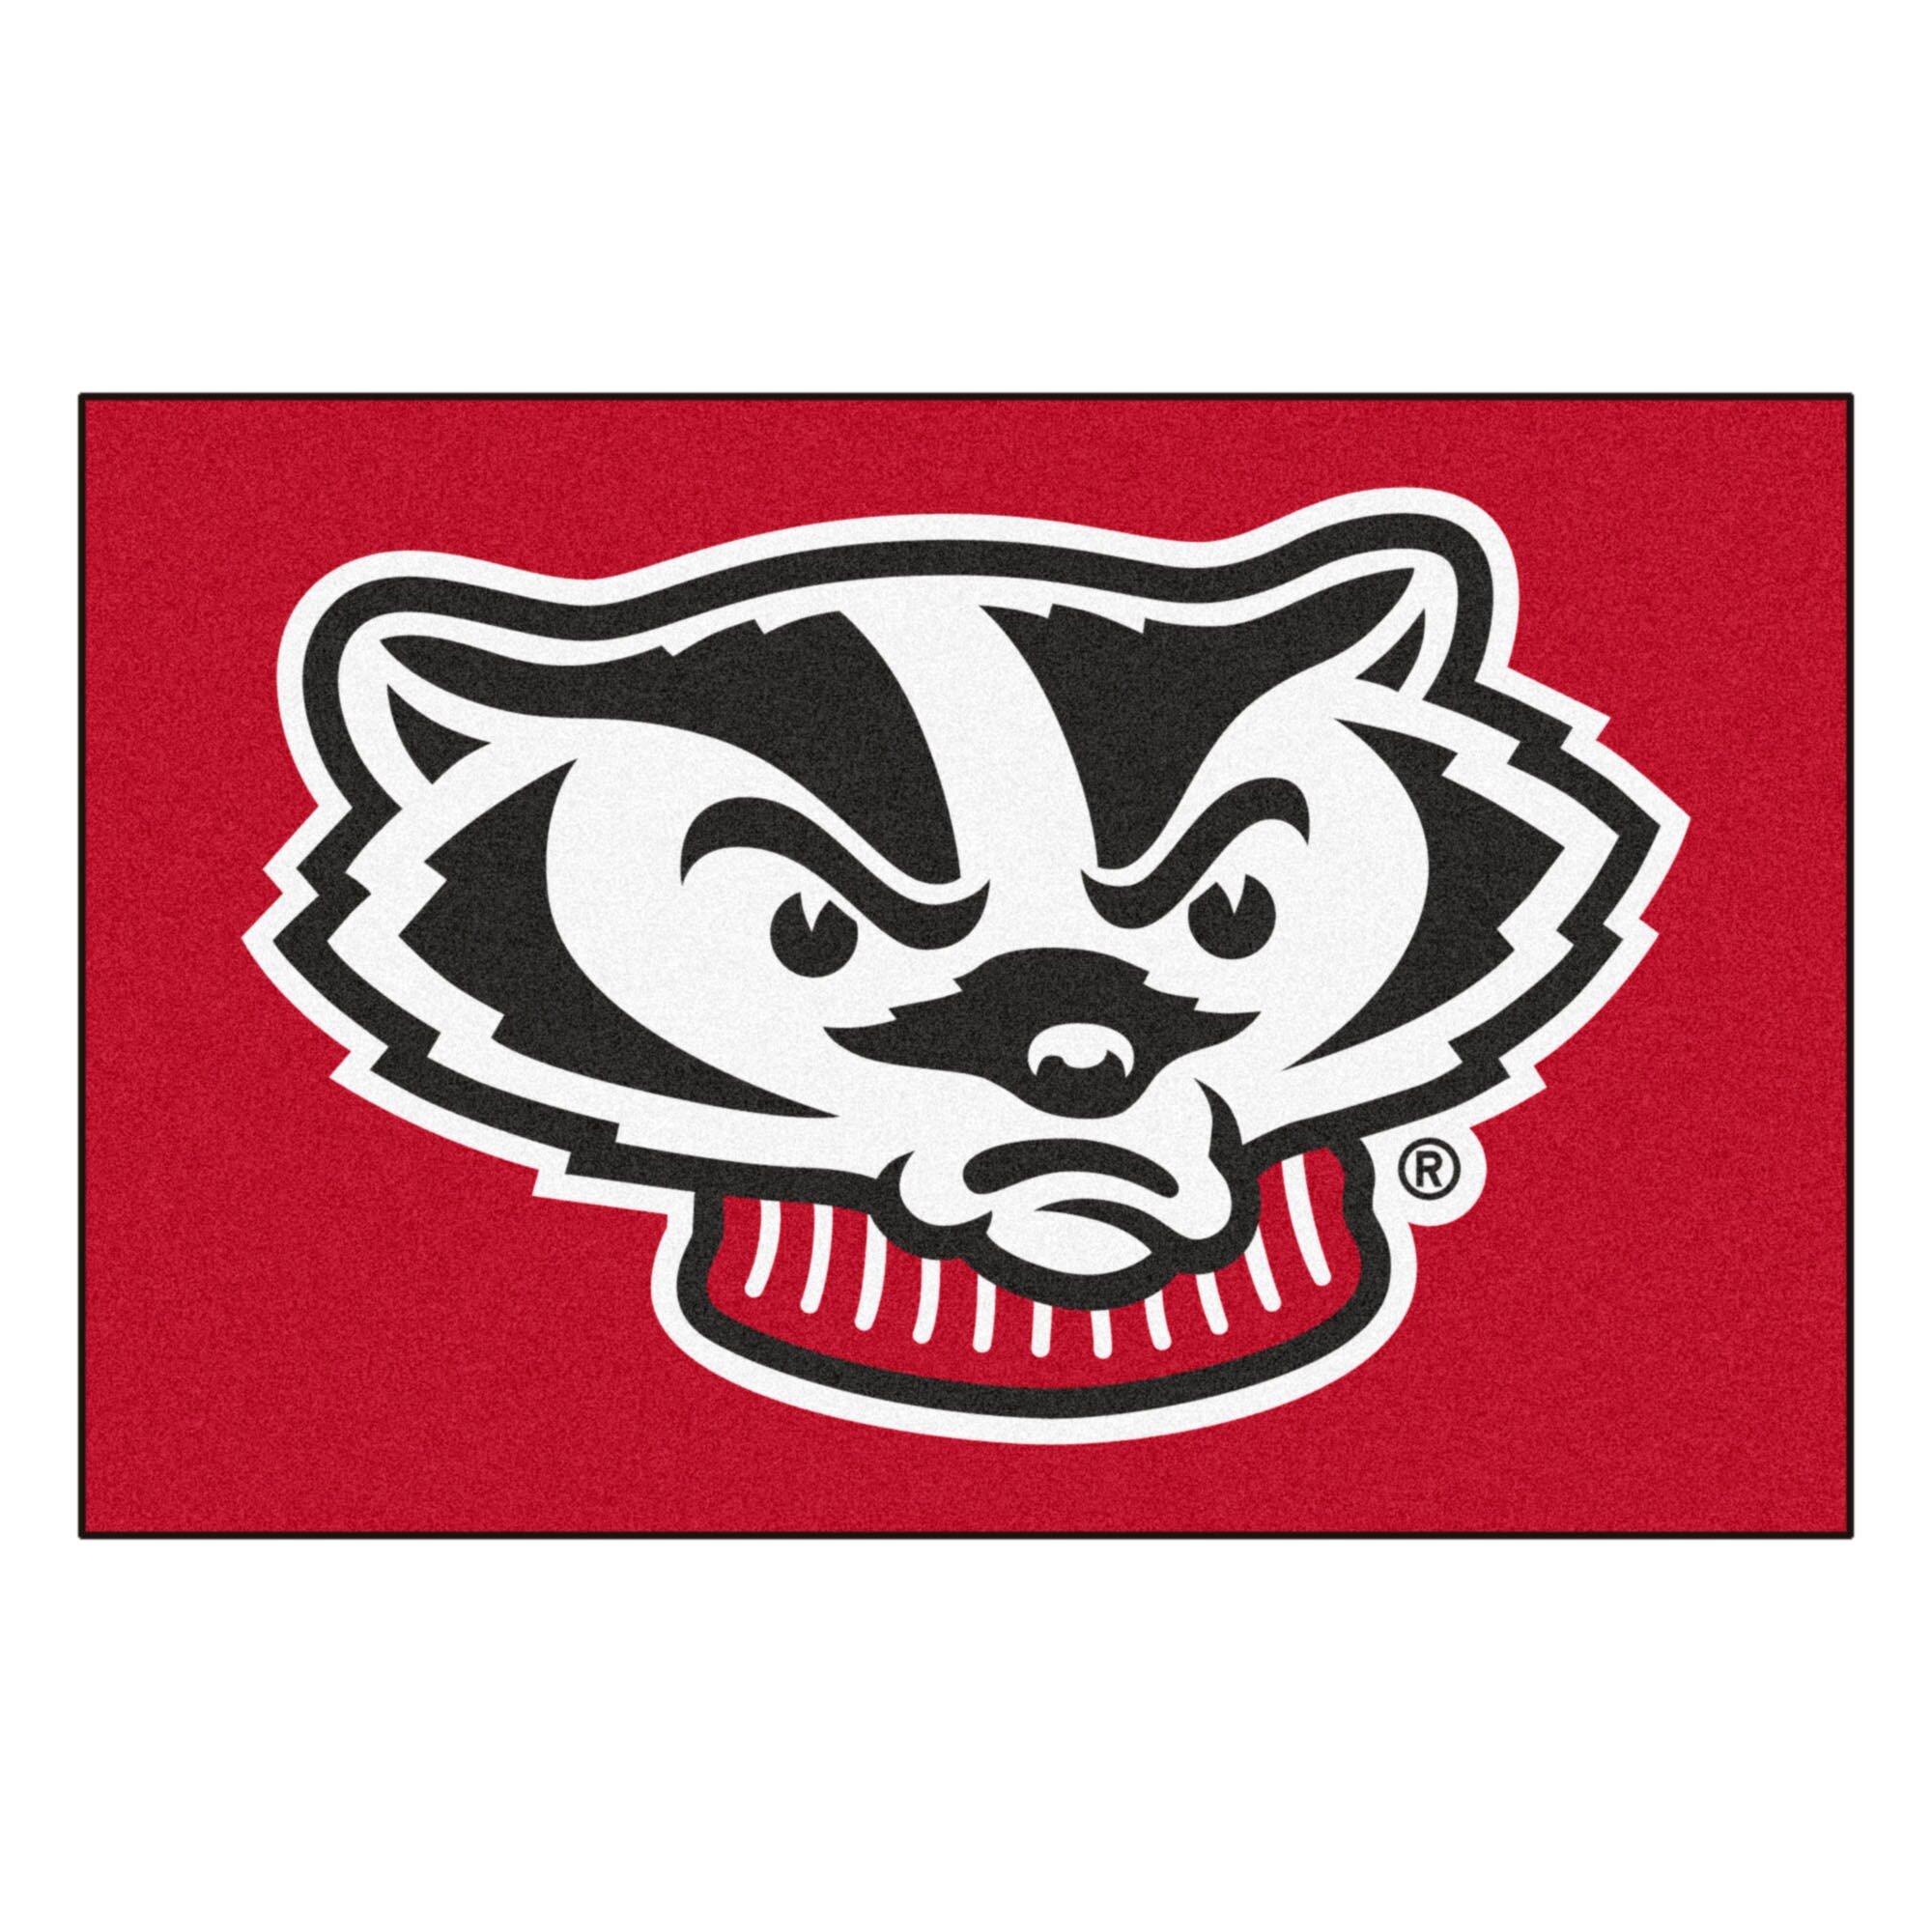 FANMATS NCAA University of Wisconsin Badgers Polyester Head Rest Cover 